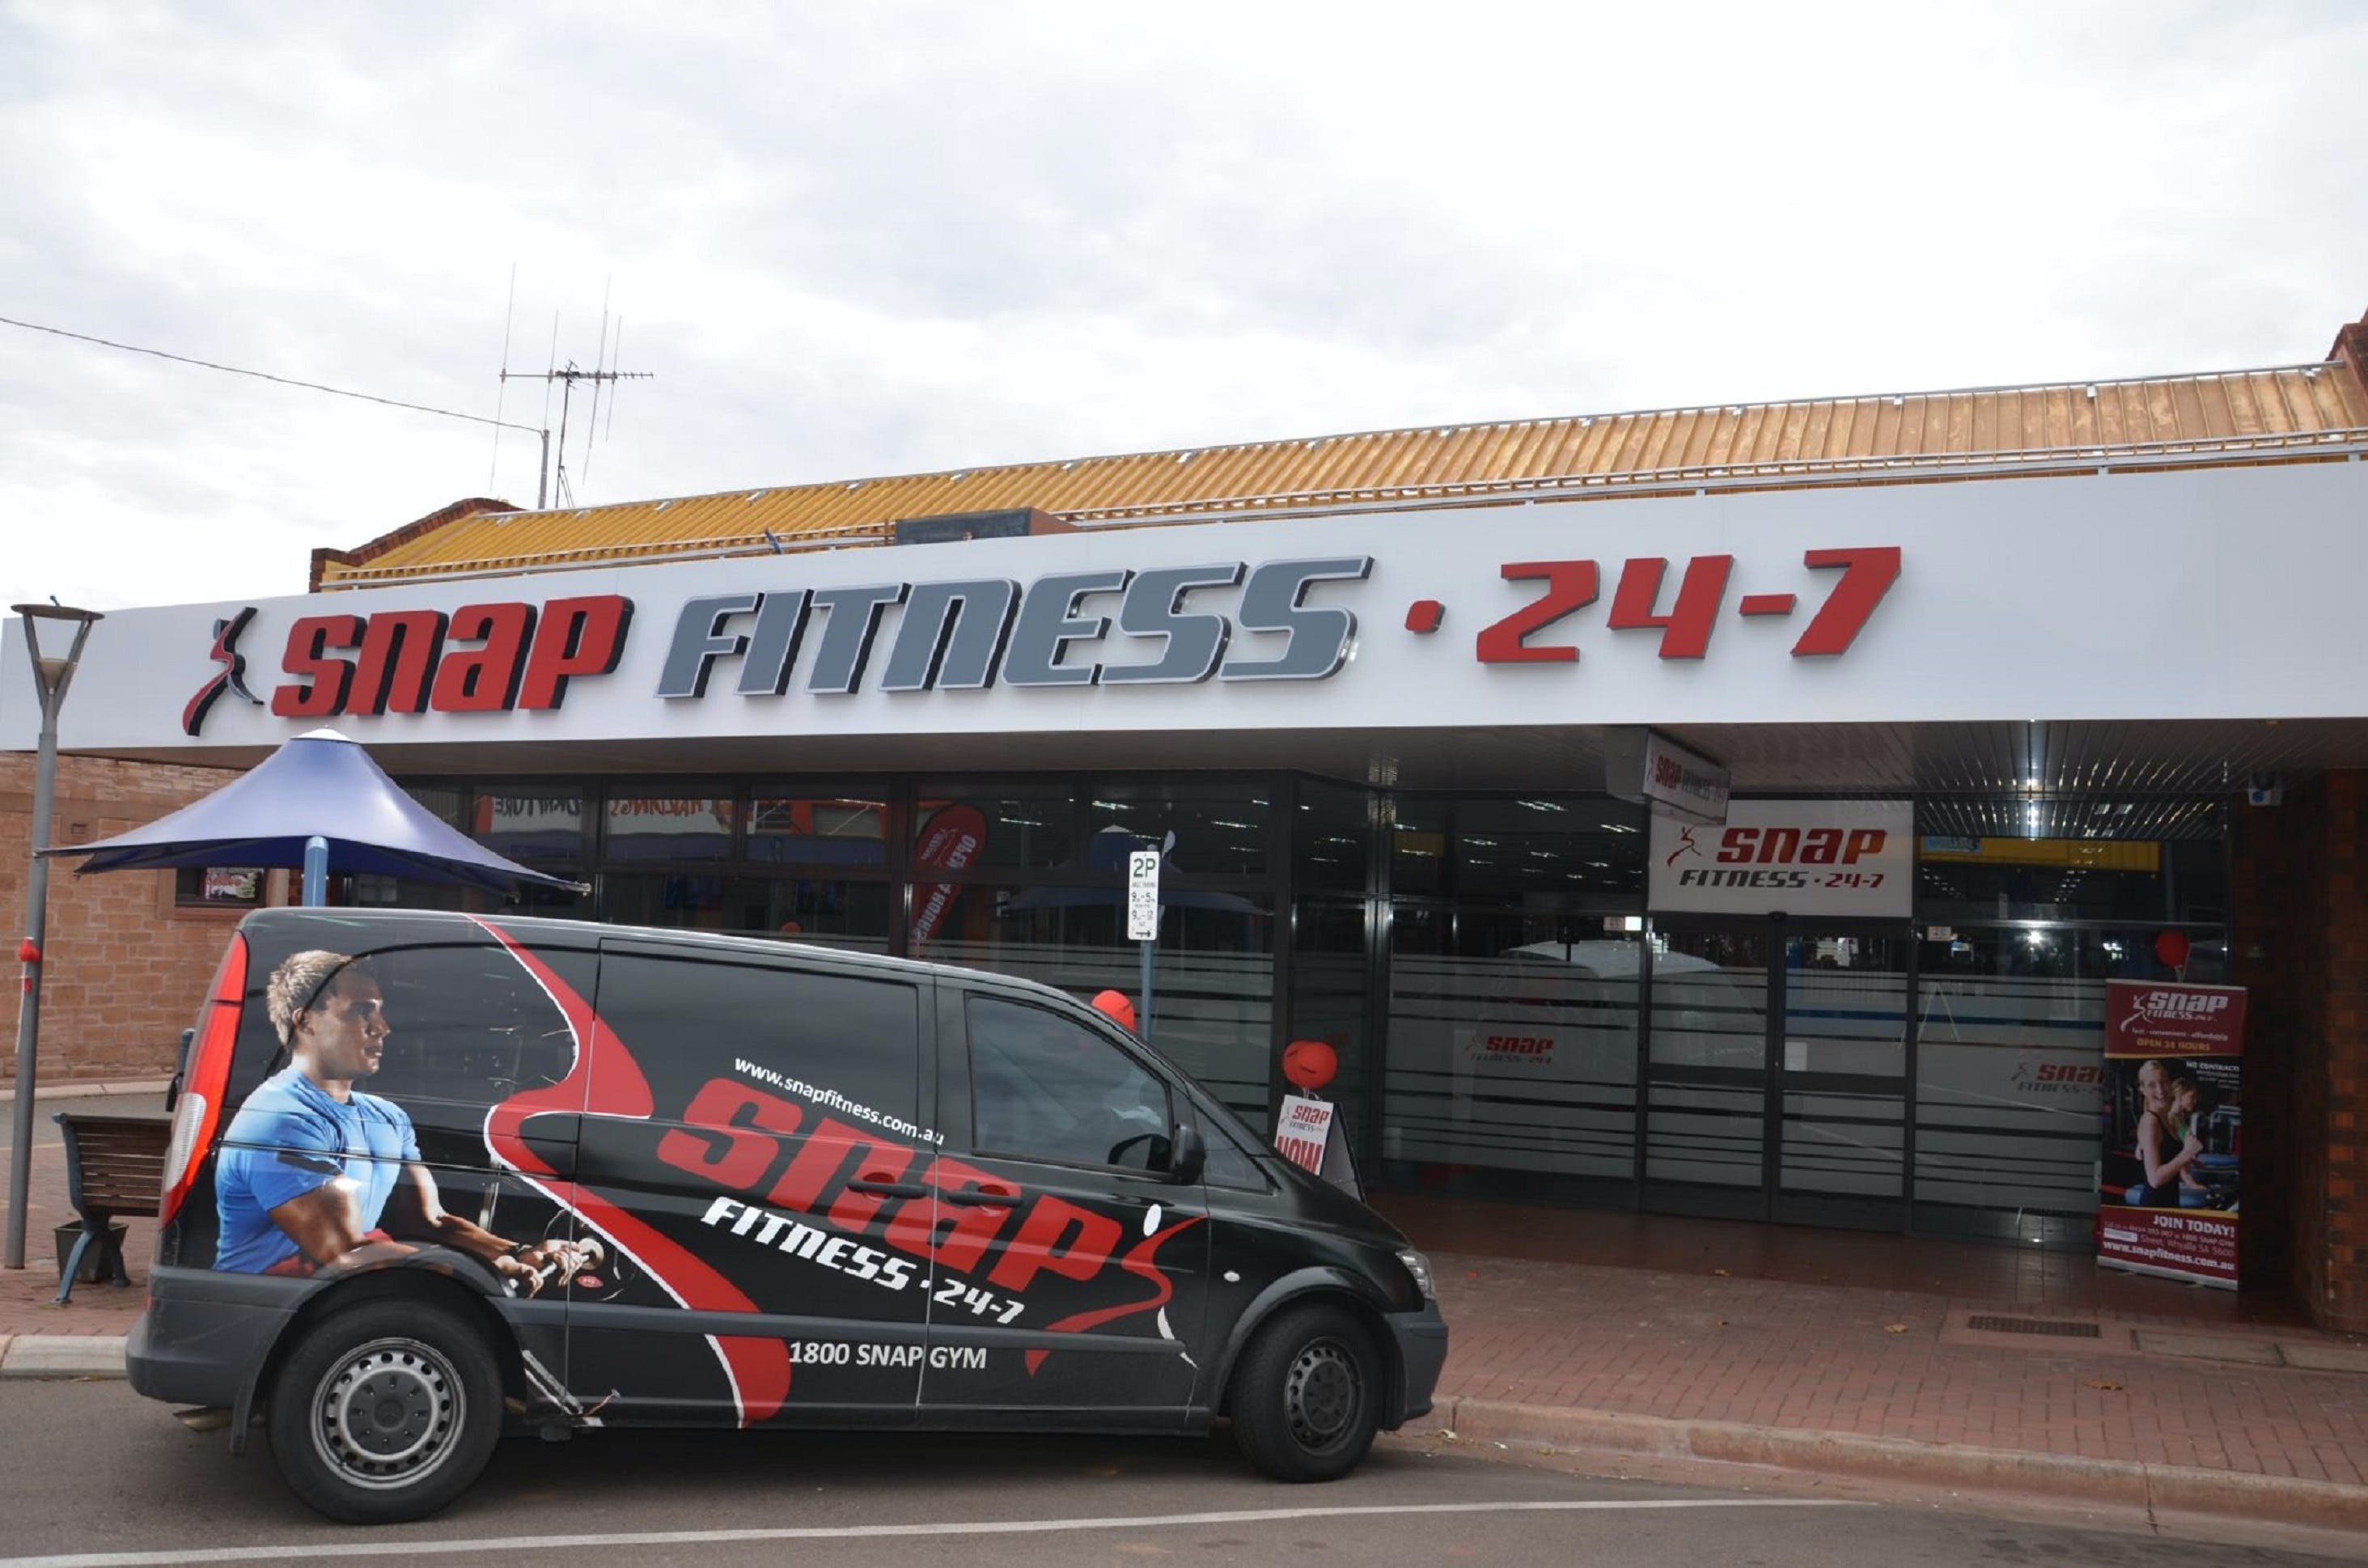 Snap Fitness Whyalla 24/7 gym - WA Accommodation